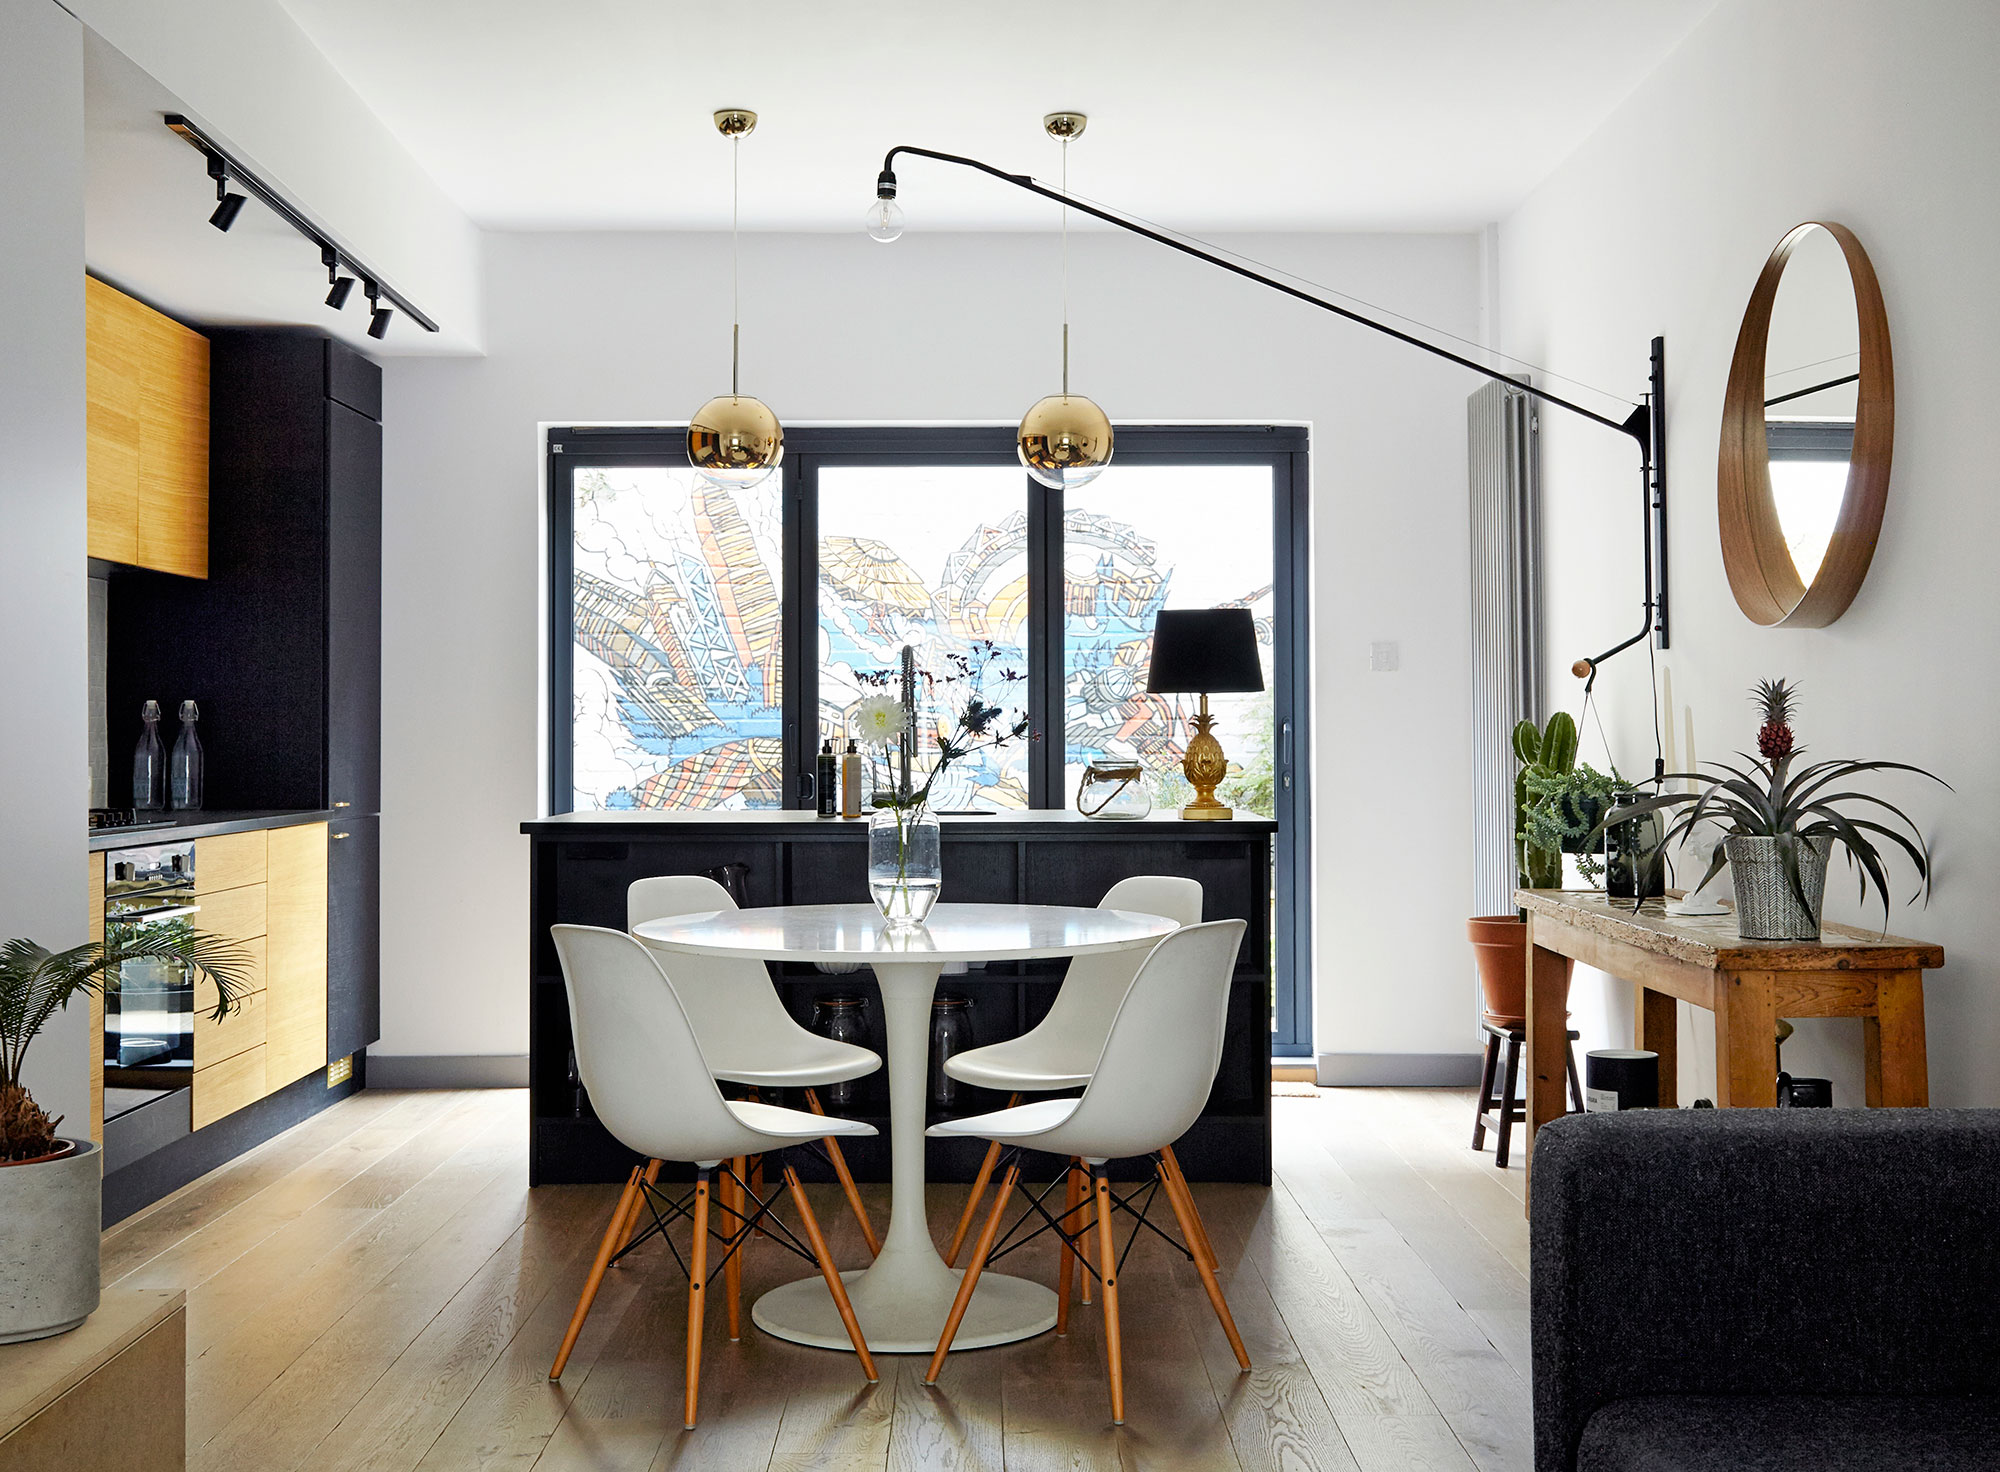 House of Sylphina interior design, Dalston. Monochrome kitchen dining room with gold accents